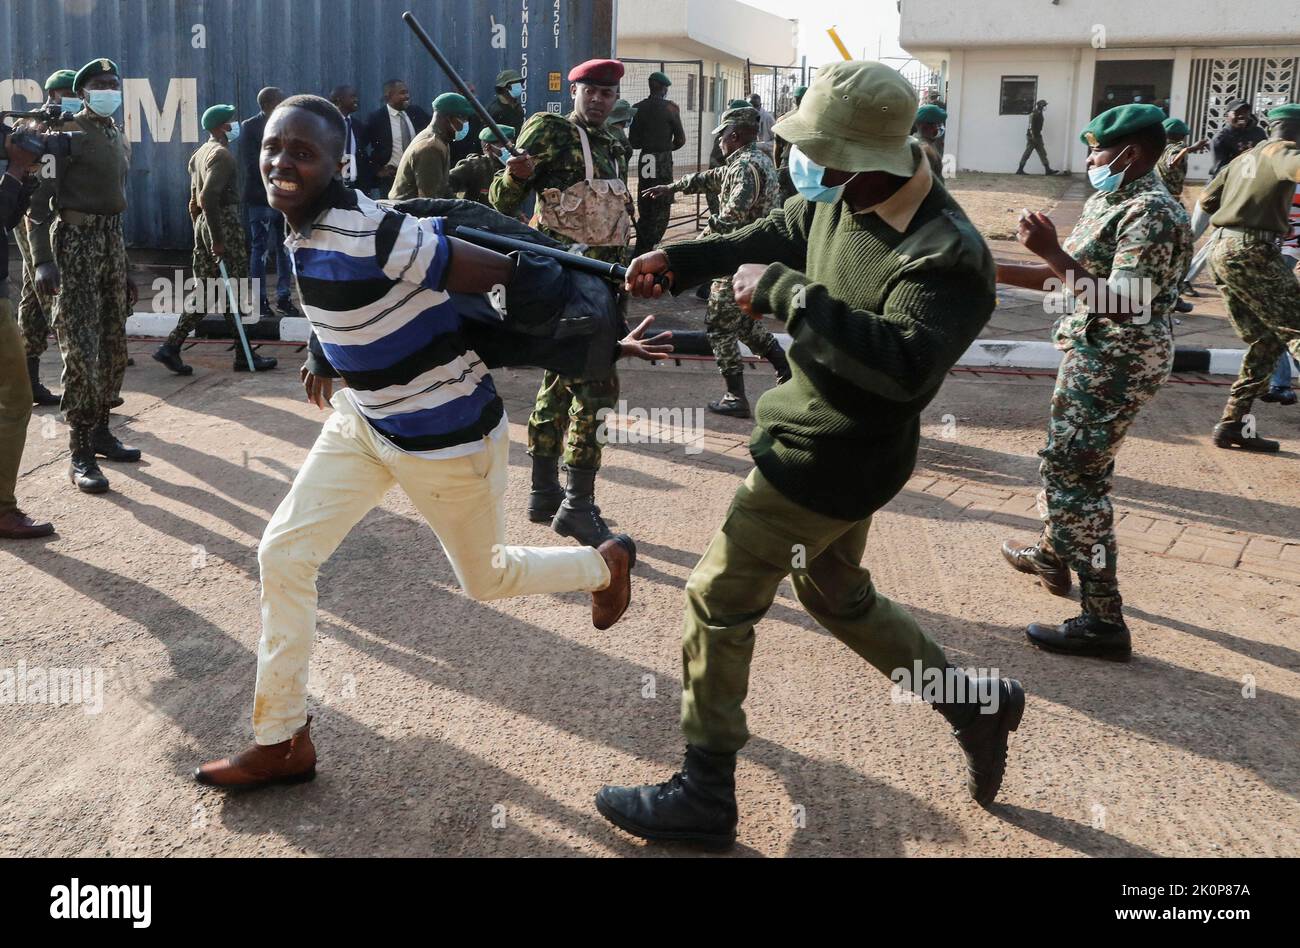 Riot police attempt to control people as they jostle to attend the inauguration of Kenya's President William Ruto before his swearing-in ceremony at the Moi International Stadium Kasarani, in Nairobi, Kenya September 13, 2022. REUTERS/Thomas Mukoya Stock Photo